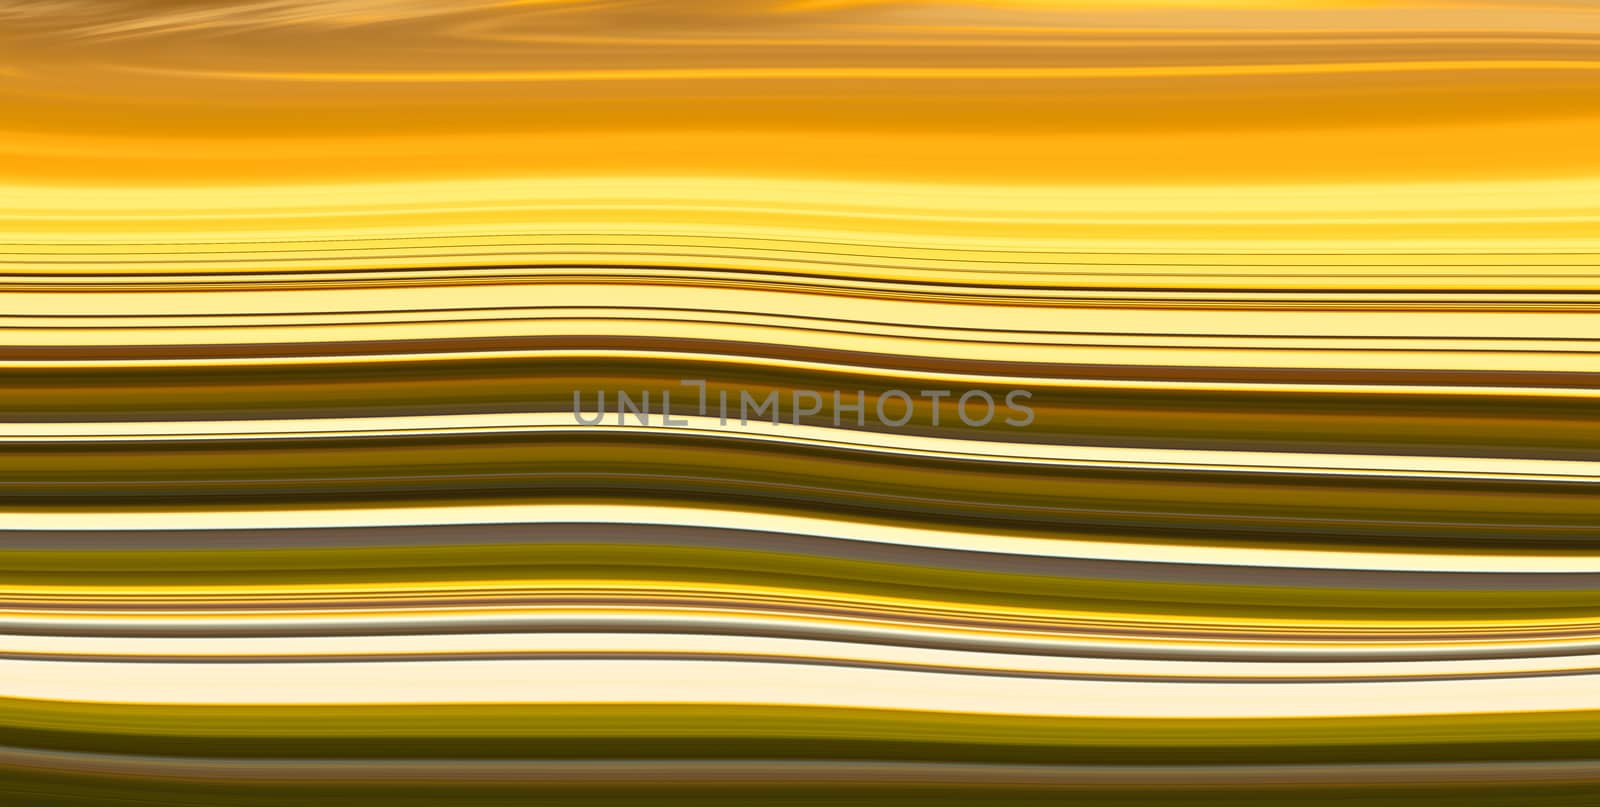 image of an abstract color background.digitally generated image 